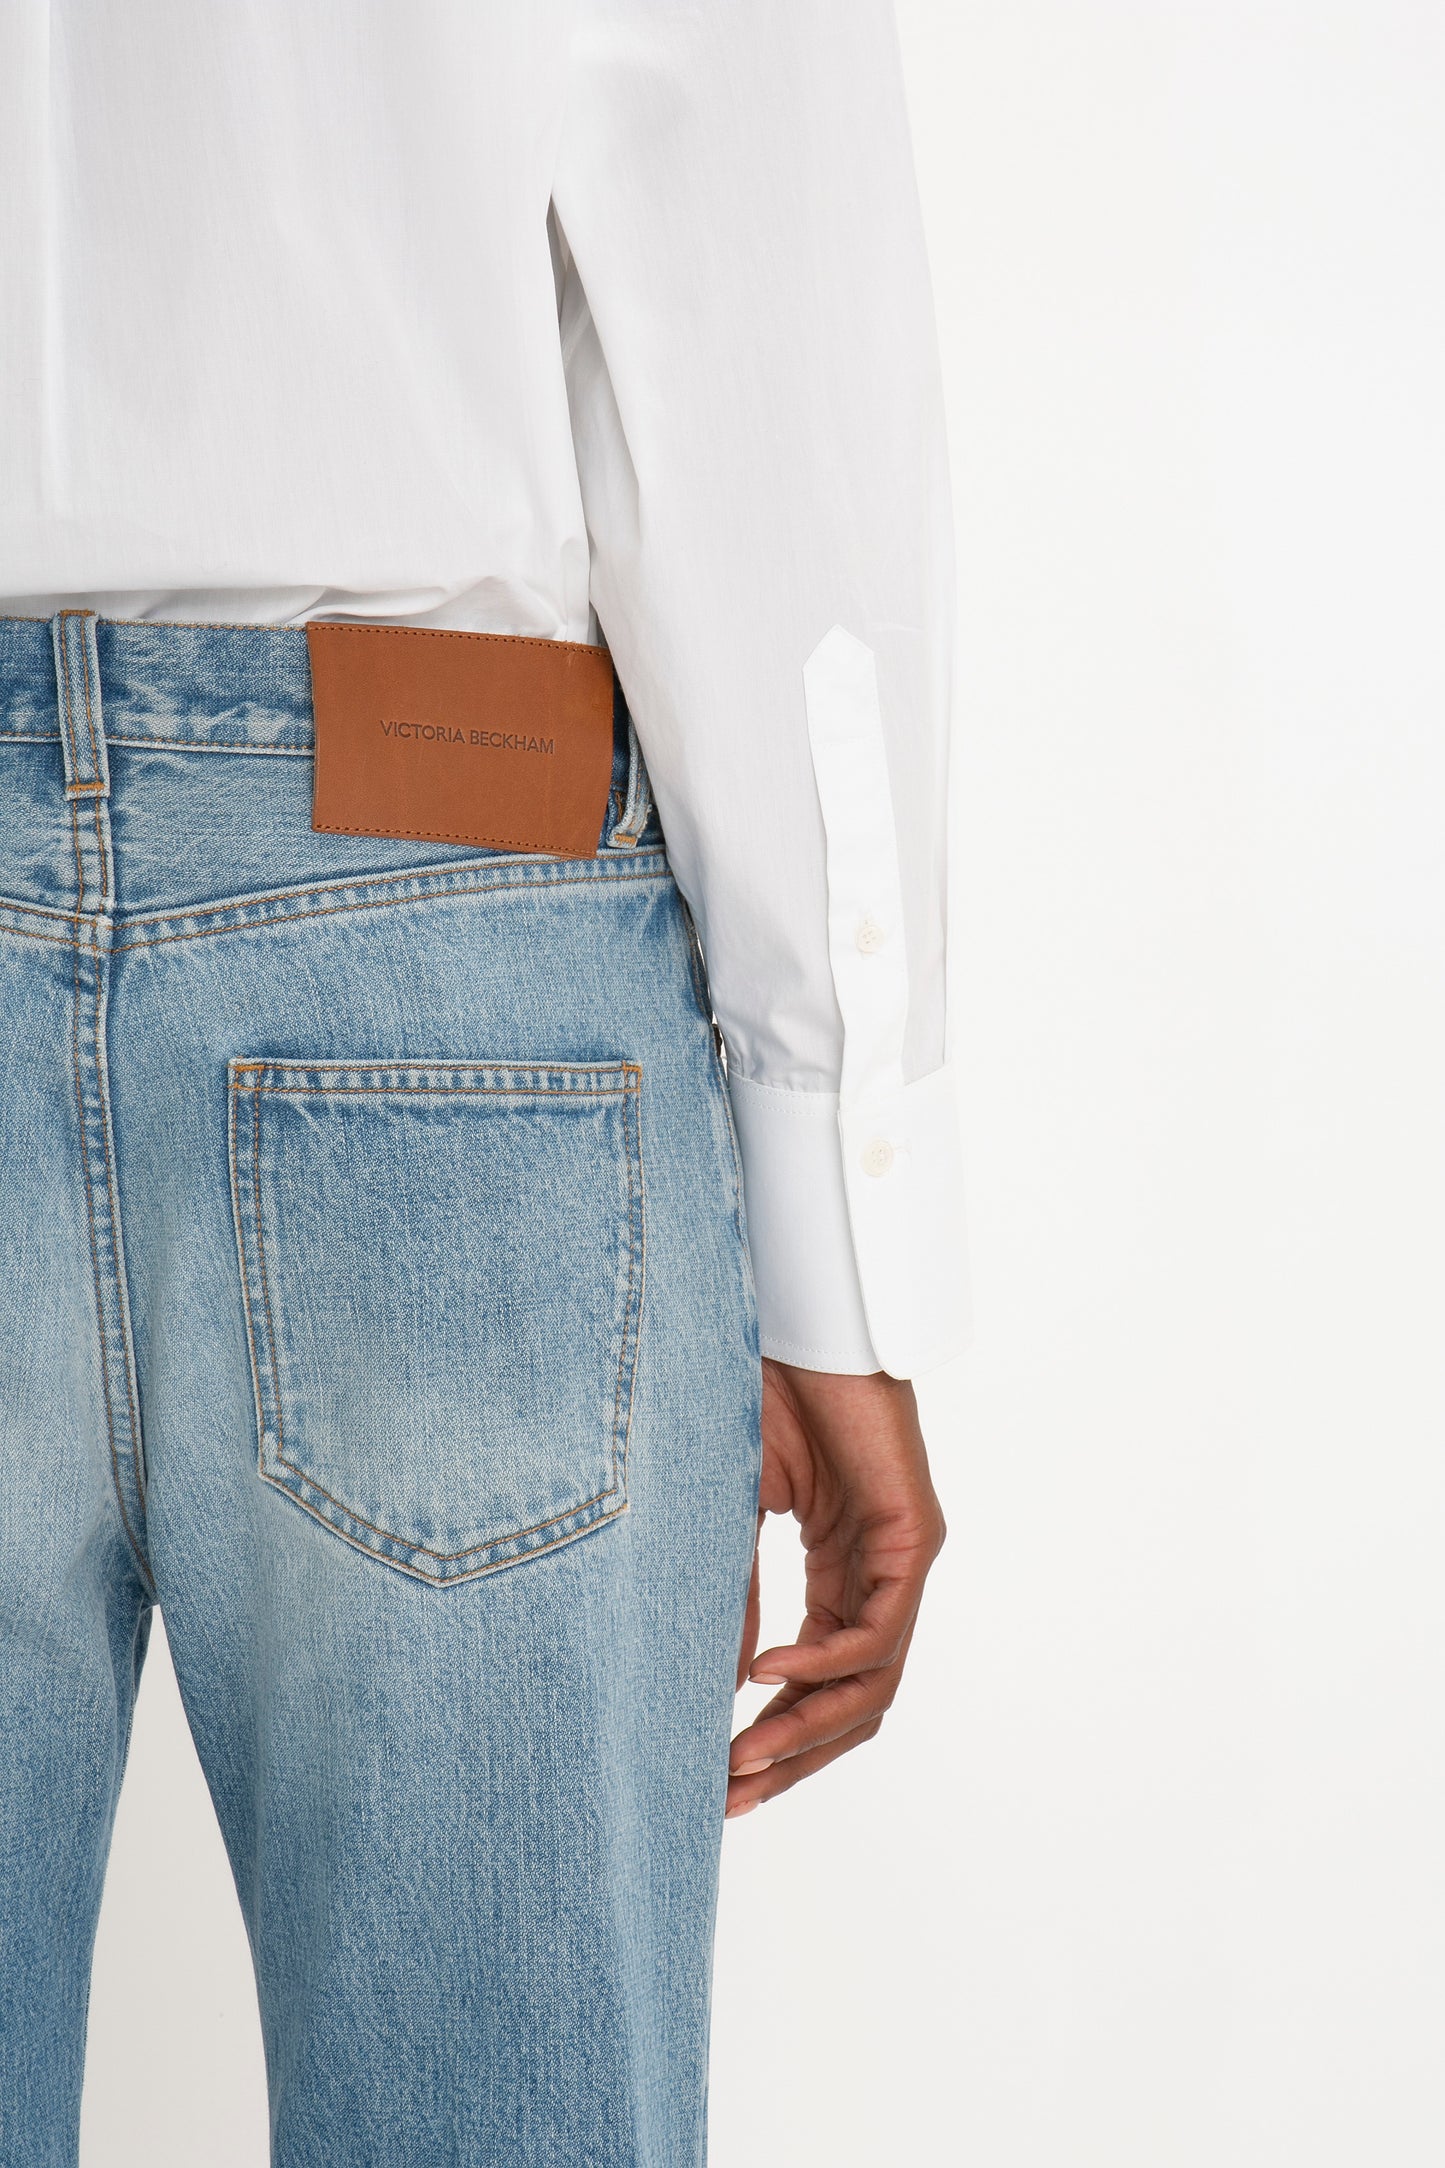 Close-up side view of a person wearing a Victoria Beckham Cropped Long Sleeve Shirt In White tucked into blue jeans, highlighting a brown leather 'Victoria Beckham' branded label on the jeans.